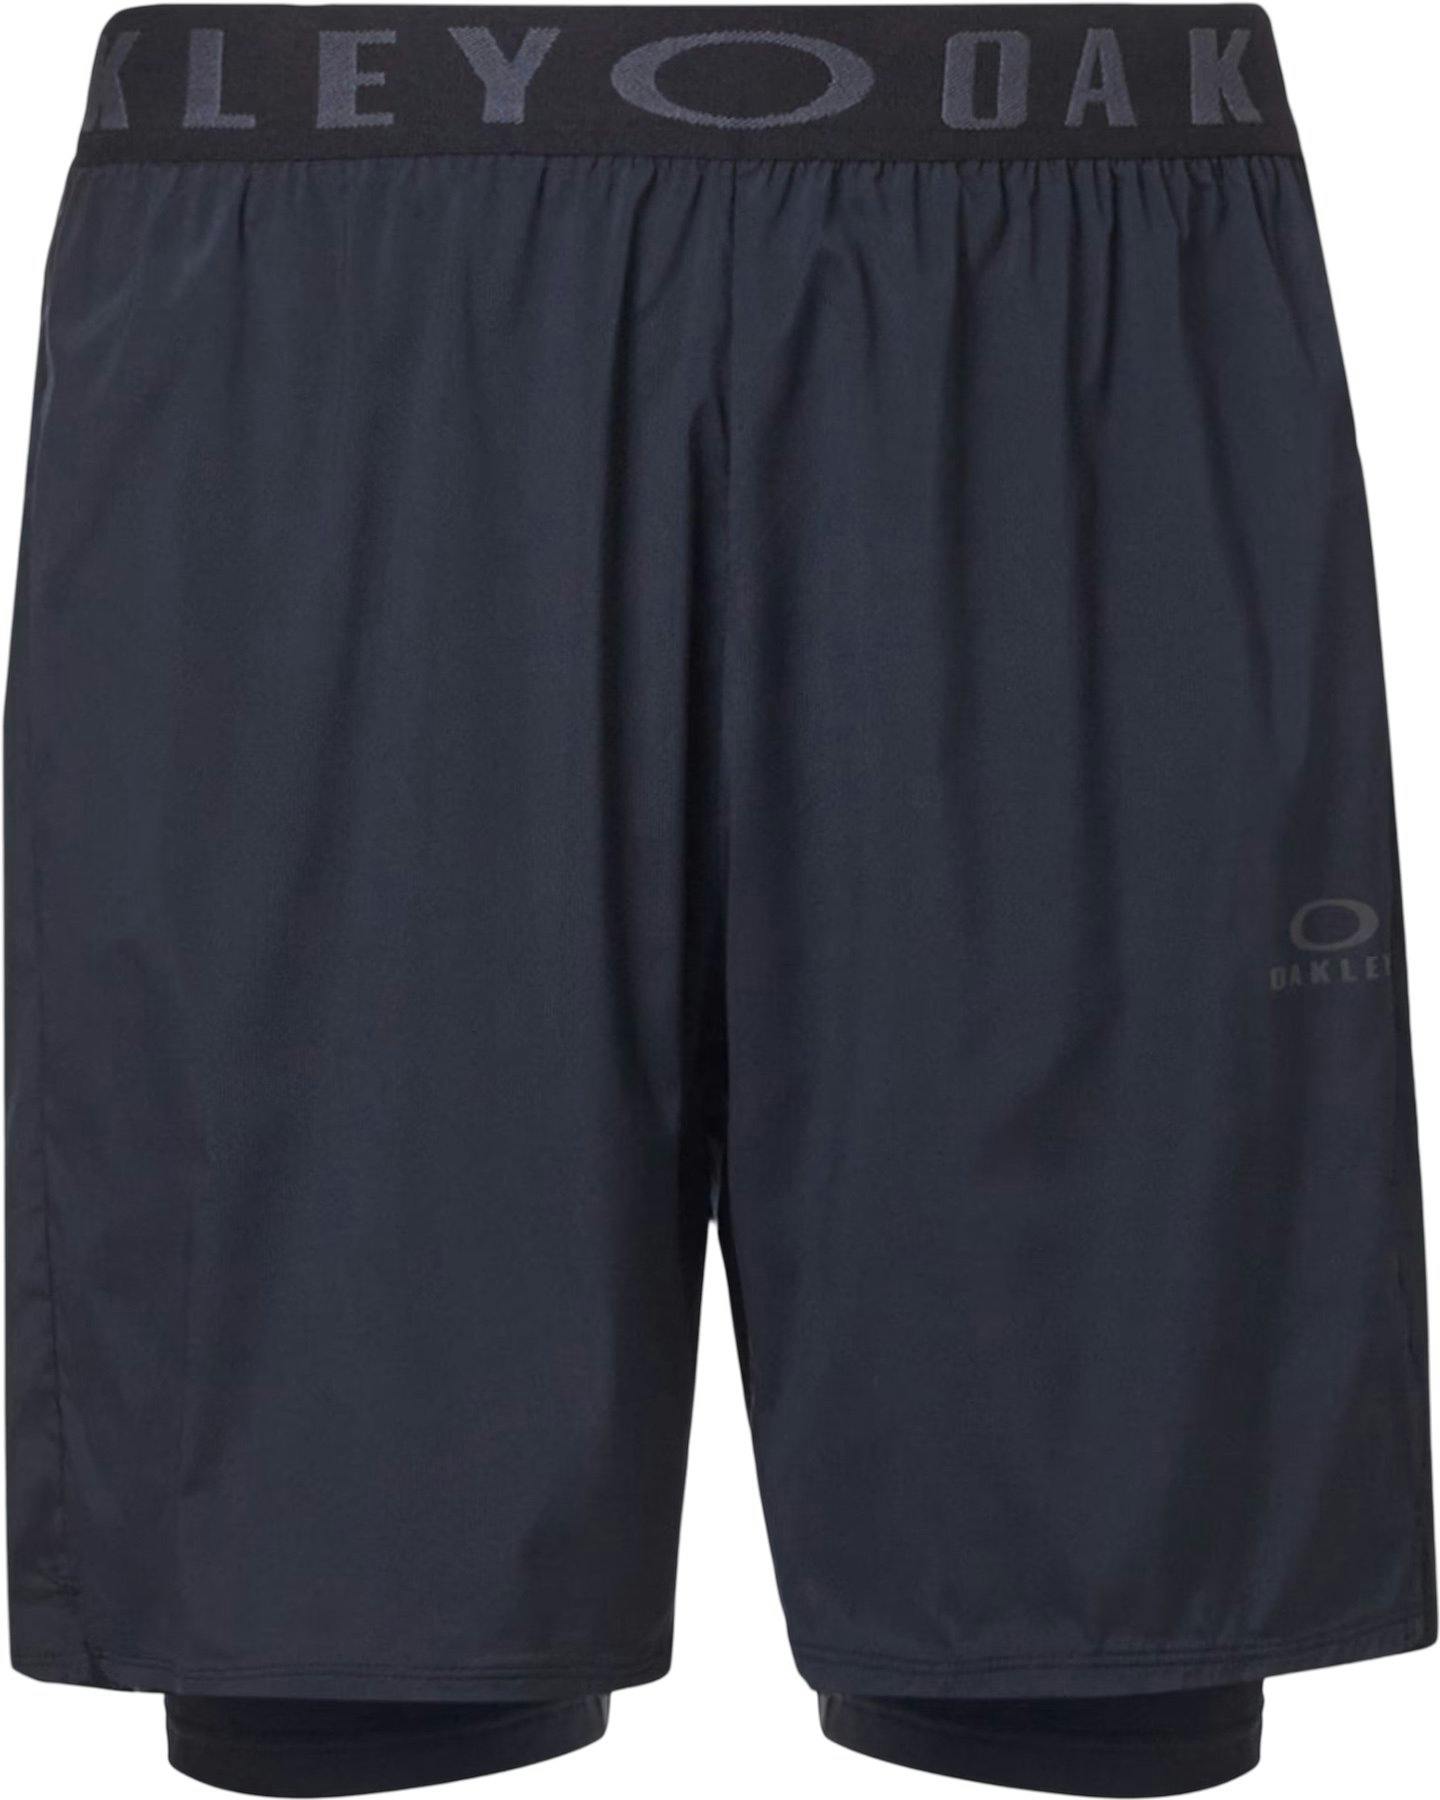 Product image for Compression 2.0 Shorts 9" - Men's